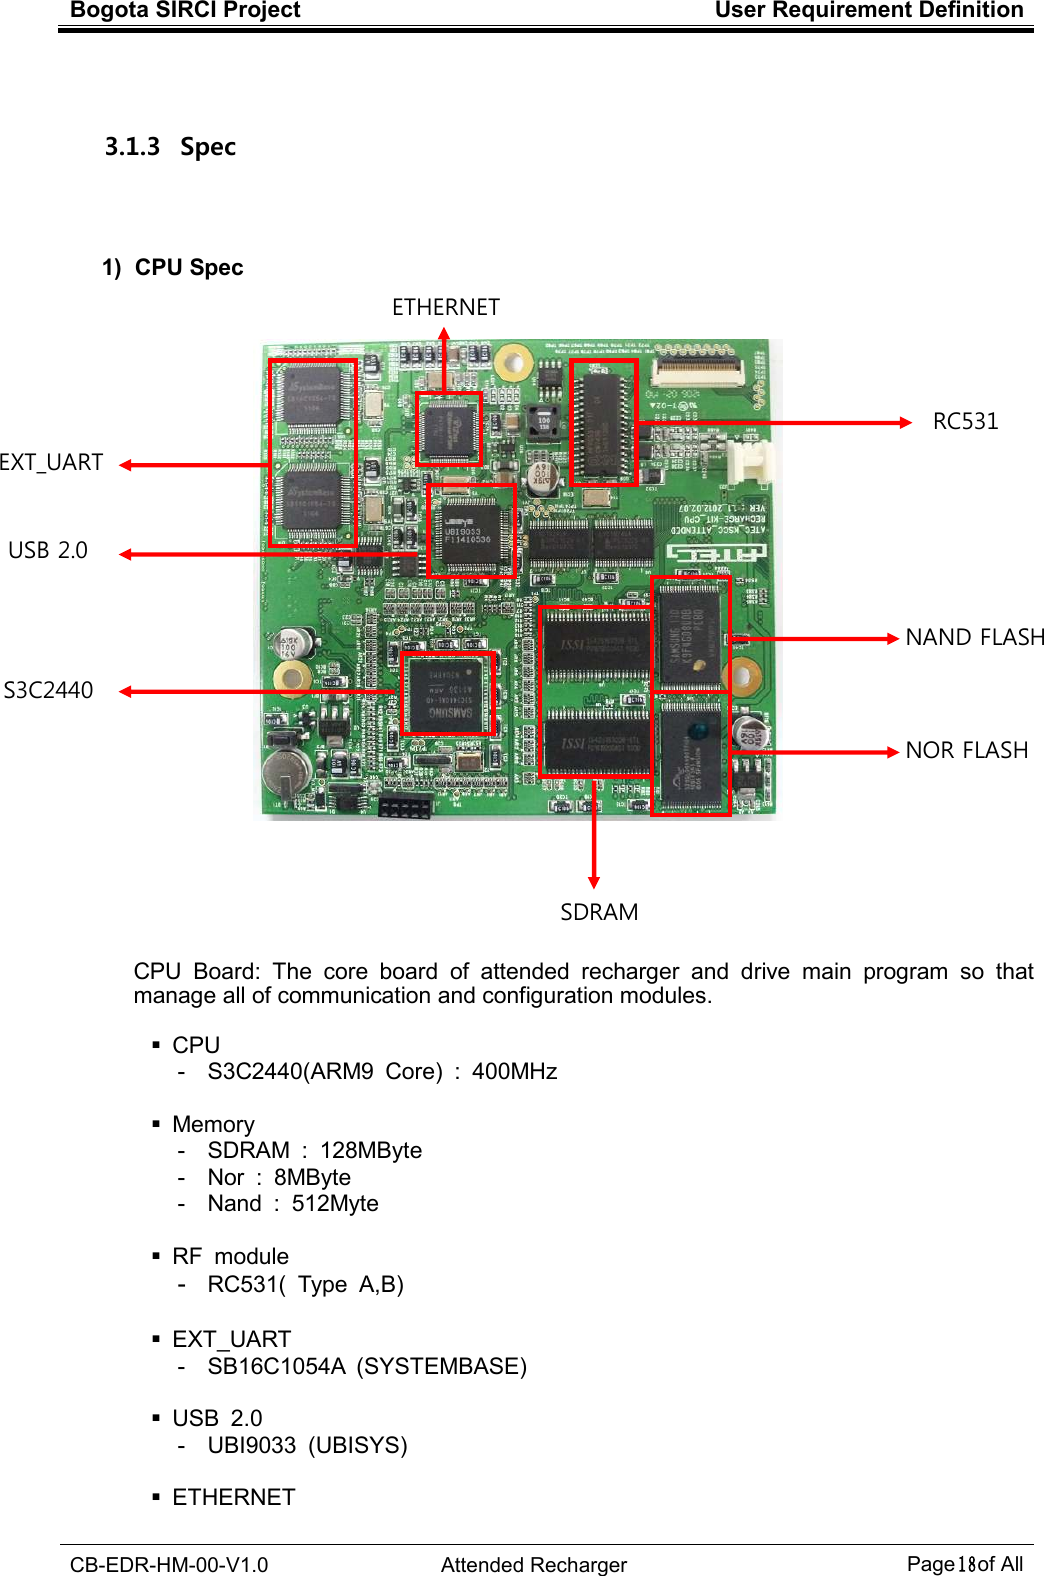 Bogota SIRCI Project  User Requirement Definition  CB-EDR-HM-00-V1.0  Attended Recharger Page１８ of All   3.1.3   Spec   1)  CPU Spec             CPU  Board:  The  core  board  of  attended  recharger  and  drive  main  program  so  that manage all of communication and configuration modules.          CPU -  S3C2440(ARM9  Core)  :  400MHz    Memory -  SDRAM  :  128MByte -  Nor  :  8MByte -  Nand  :  512Myte    RF  module -  RC531(  Type  A,B)    EXT_UART -  SB16C1054A  (SYSTEMBASE)    USB  2.0 -  UBI9033  (UBISYS)    ETHERNET                      EXT_UART            USB 2.0            S3C2440            RC531            ETHERNET            NAND FLASH             NOR FLASH            SDRAM 